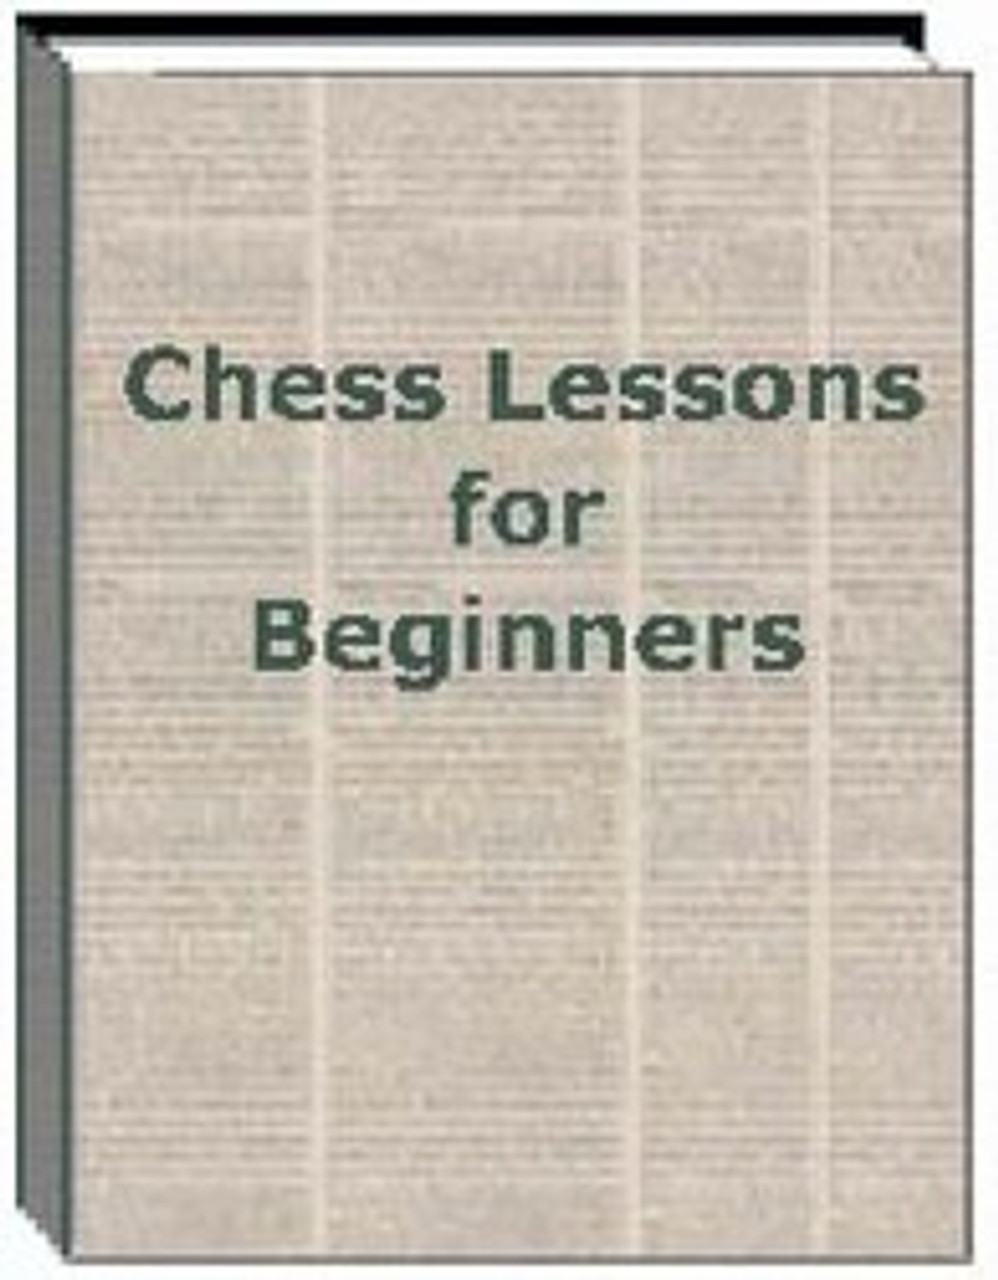 Chess Lessons for Beginners - Instructional Chess E-Book Download